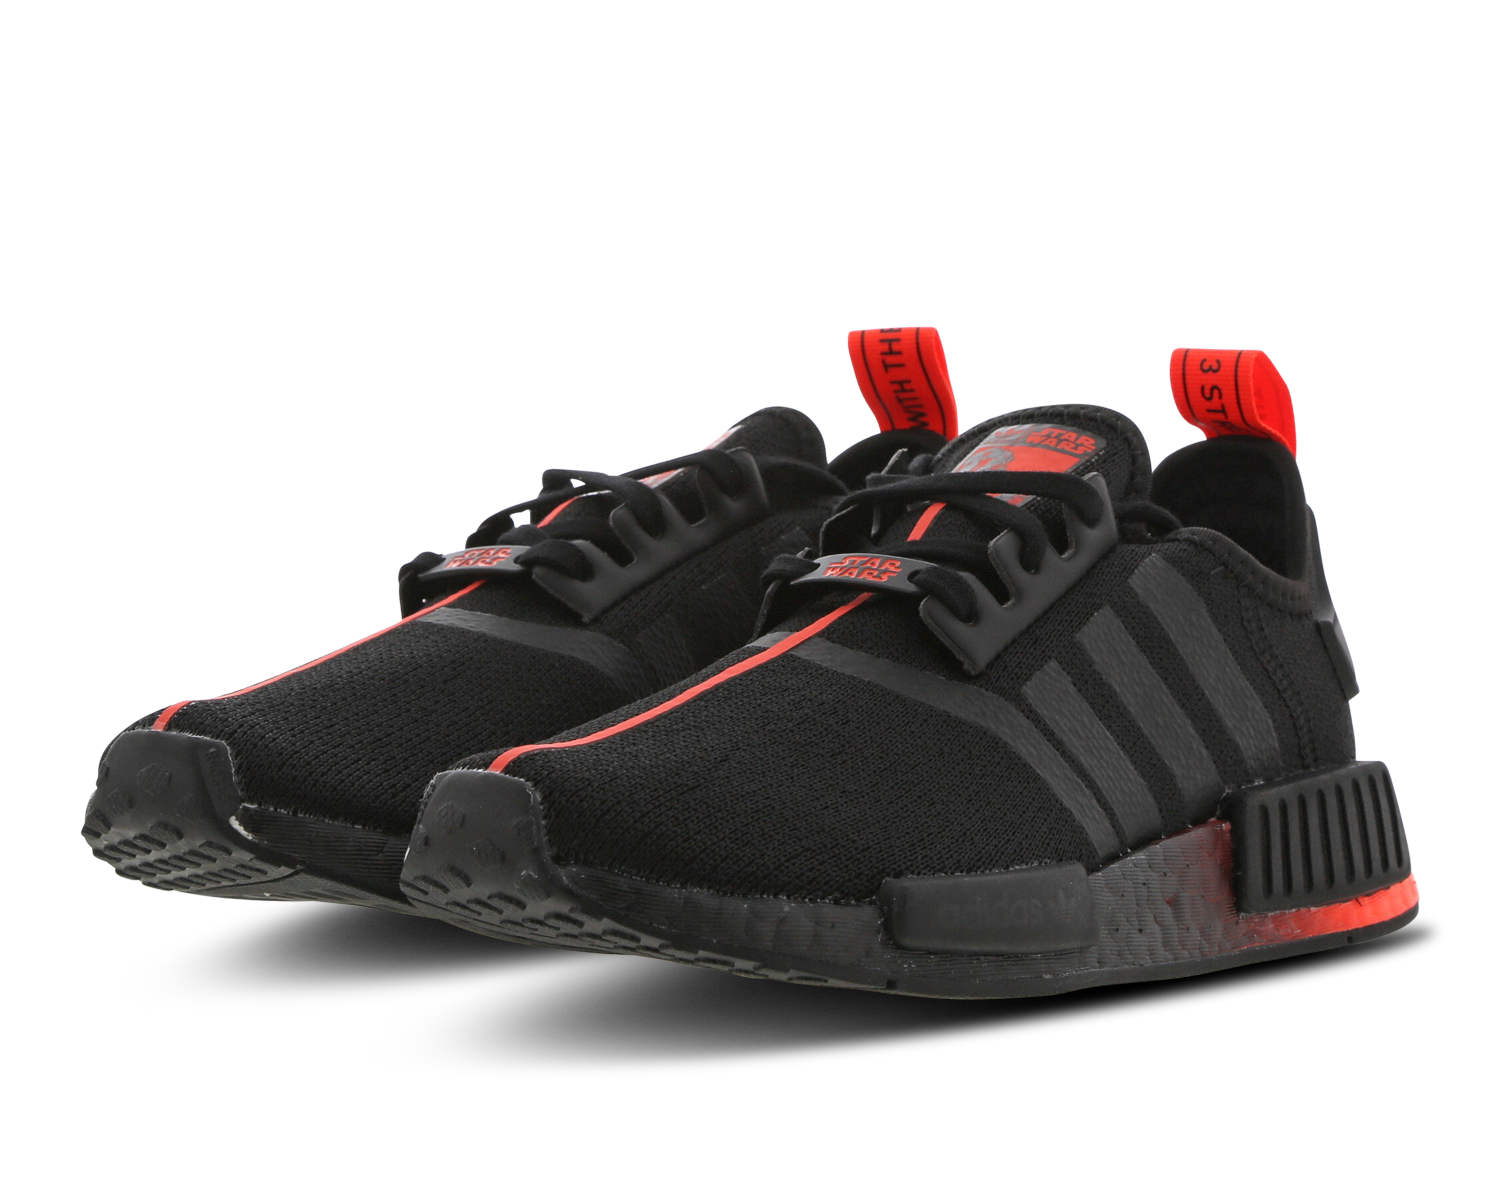 Adidas Nmd R1 W By 3033 Price India Chart In Urdu Cotton Price